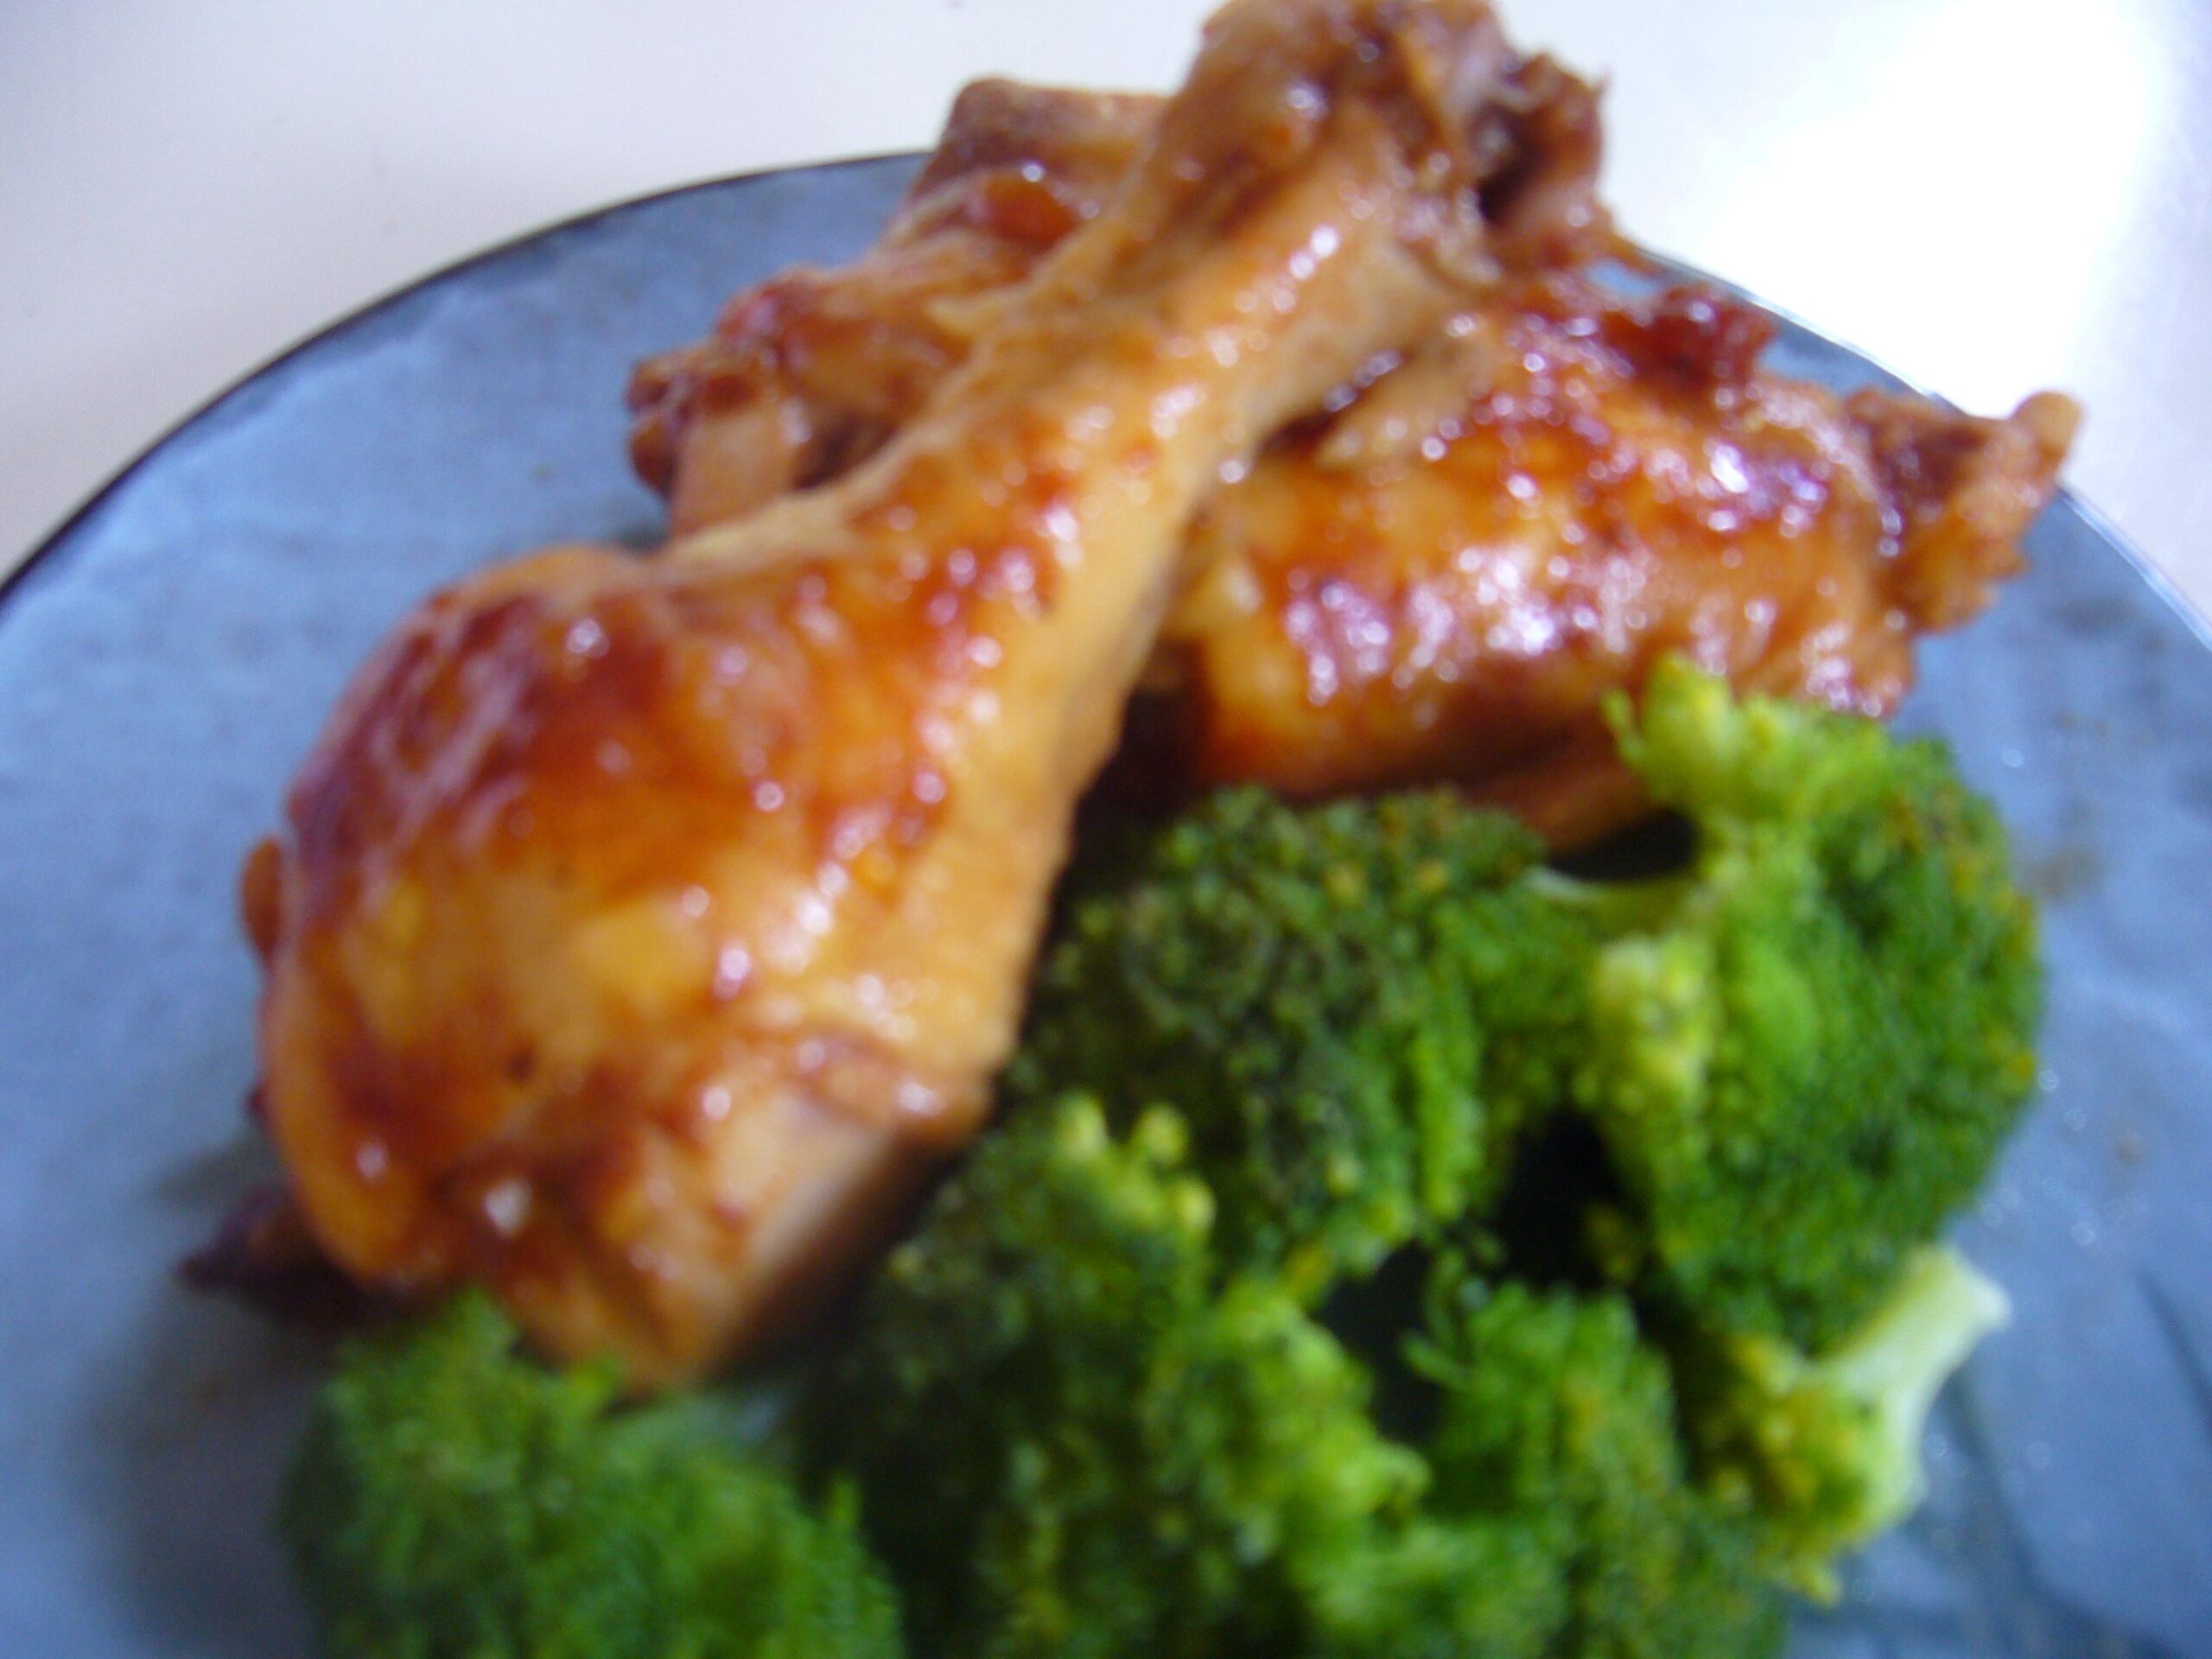  Flavorful and succulent chicken with a kick